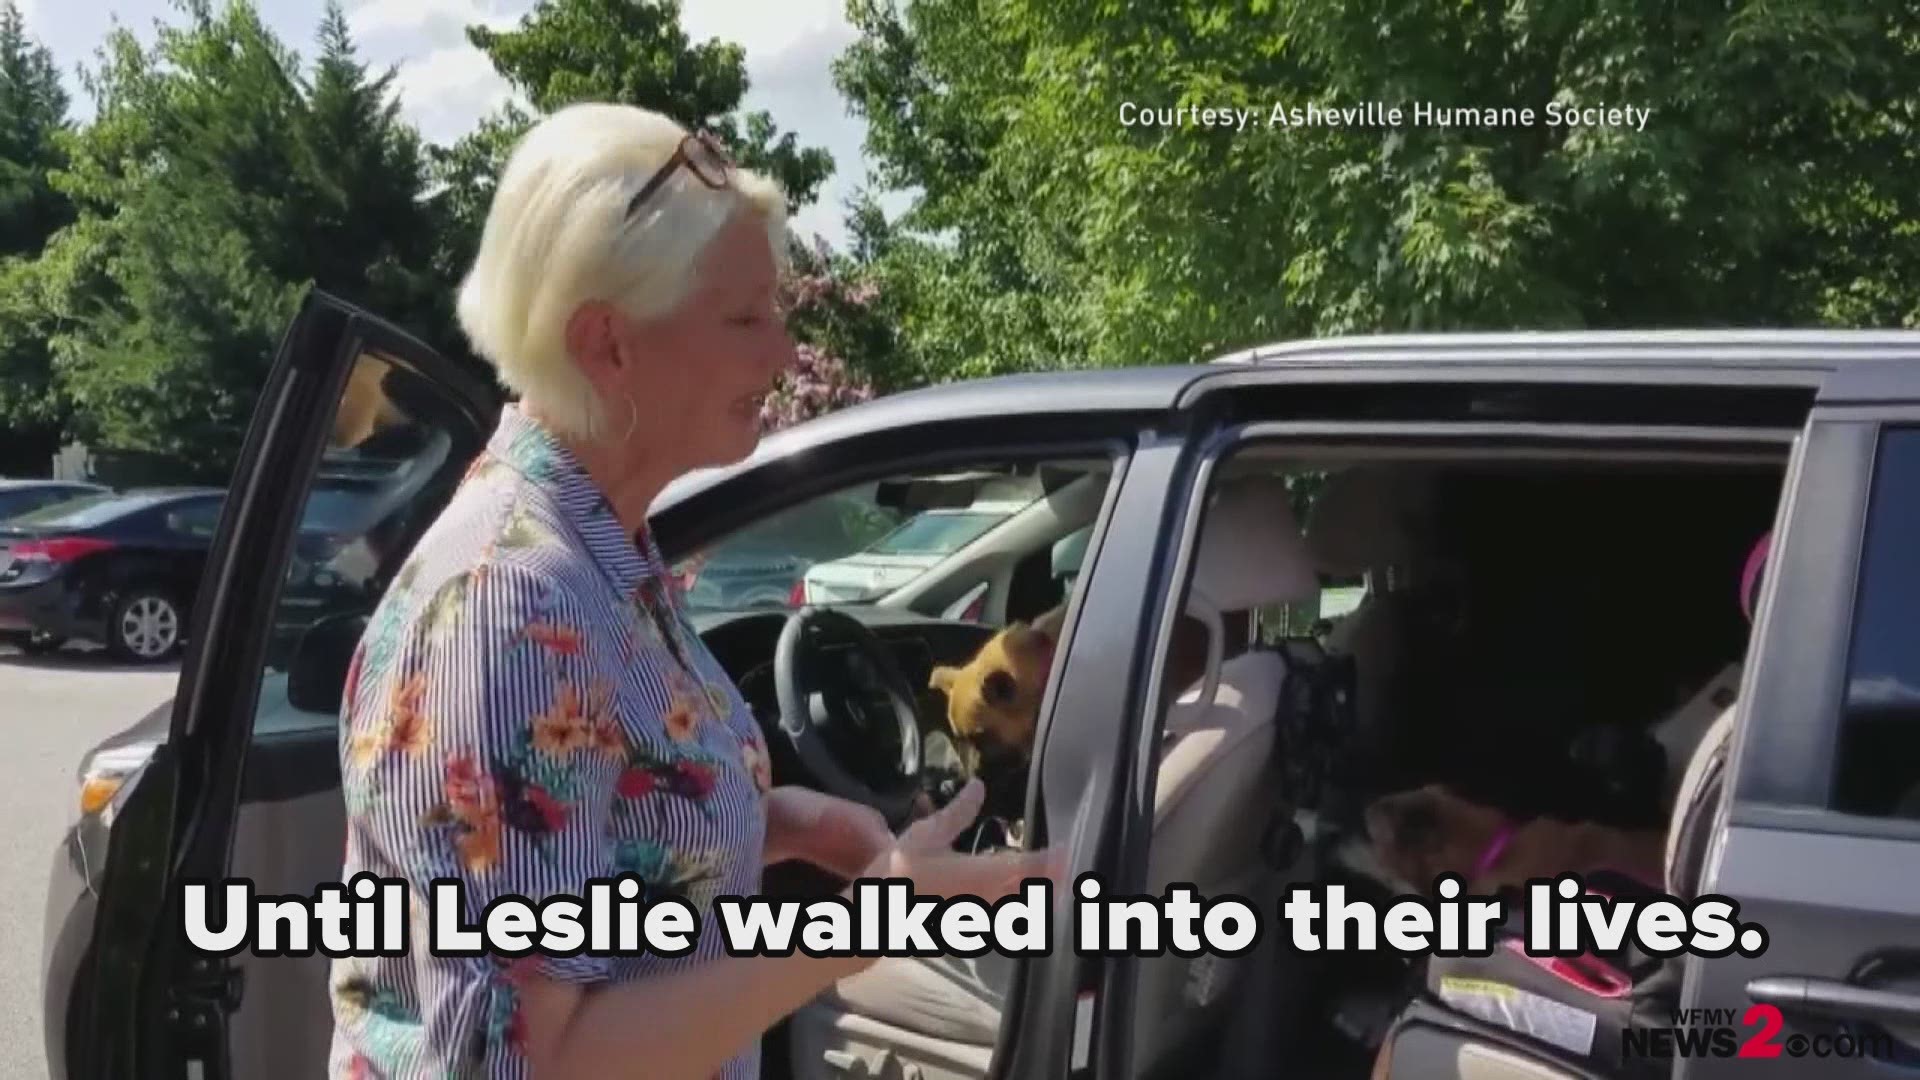 The Asheville Humane Society says Leslie walked through their doors and asked for the two dogs who'd been there the longest, with special needs. Those two senior dogs were Sam and Brutus. Leslie assured the pair that they now had a loving home, and they'd never be alone again.